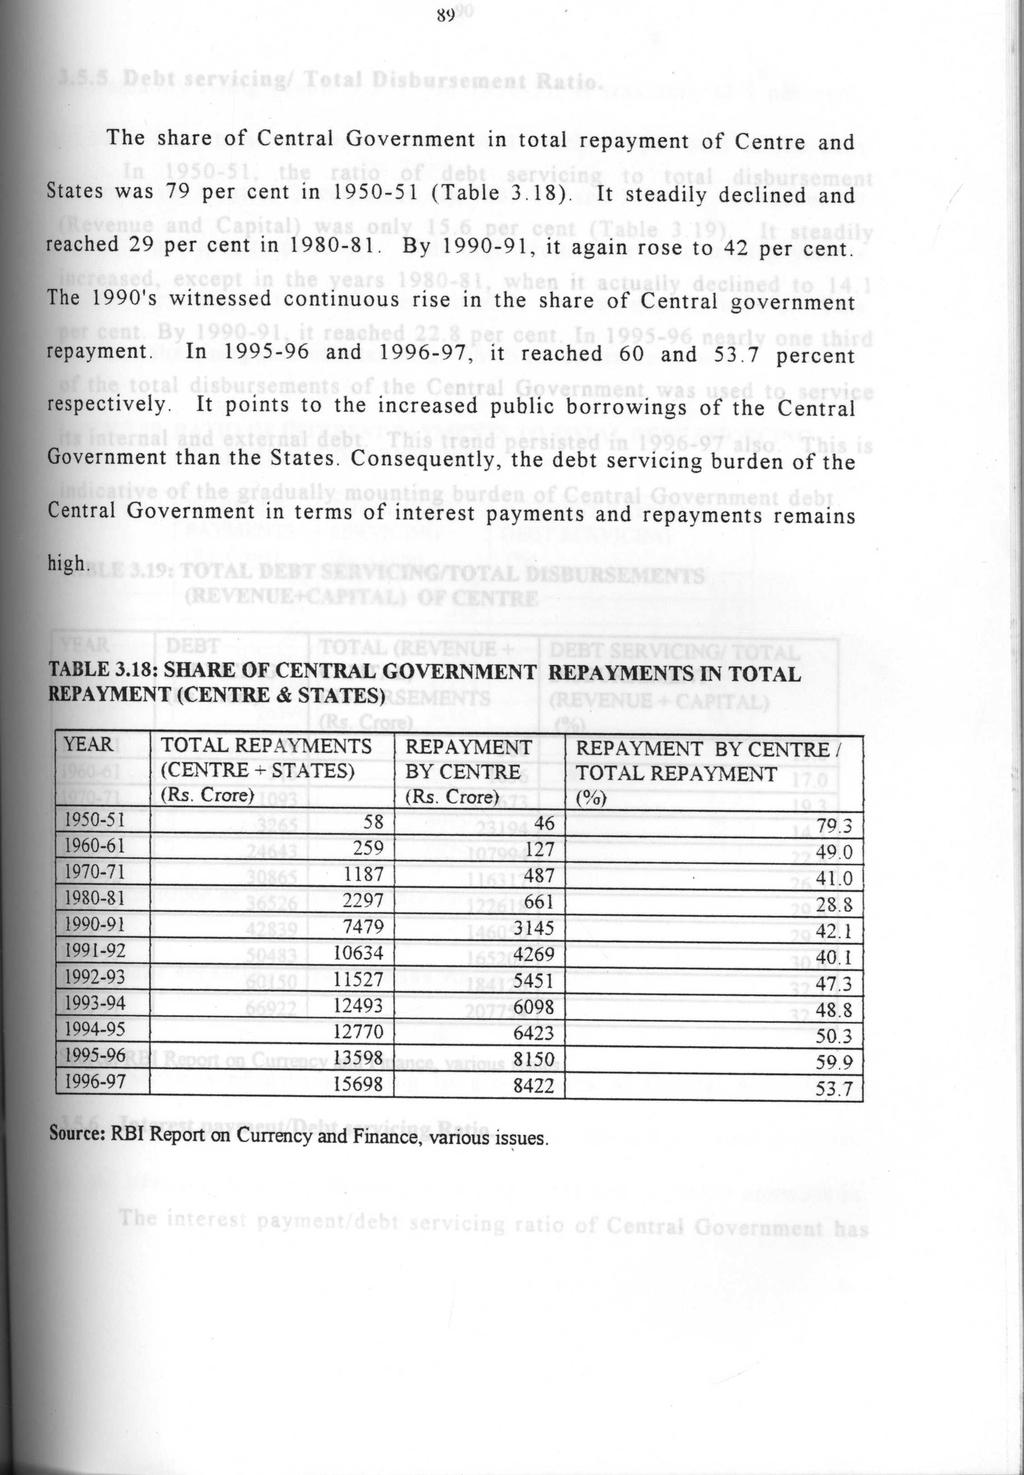 89 The share of Central Government in total repayment of Centre and States was 79 per cent in 1950-51 (Table 3.18). It steadily declined and reached 29 per cent in 1980-81.